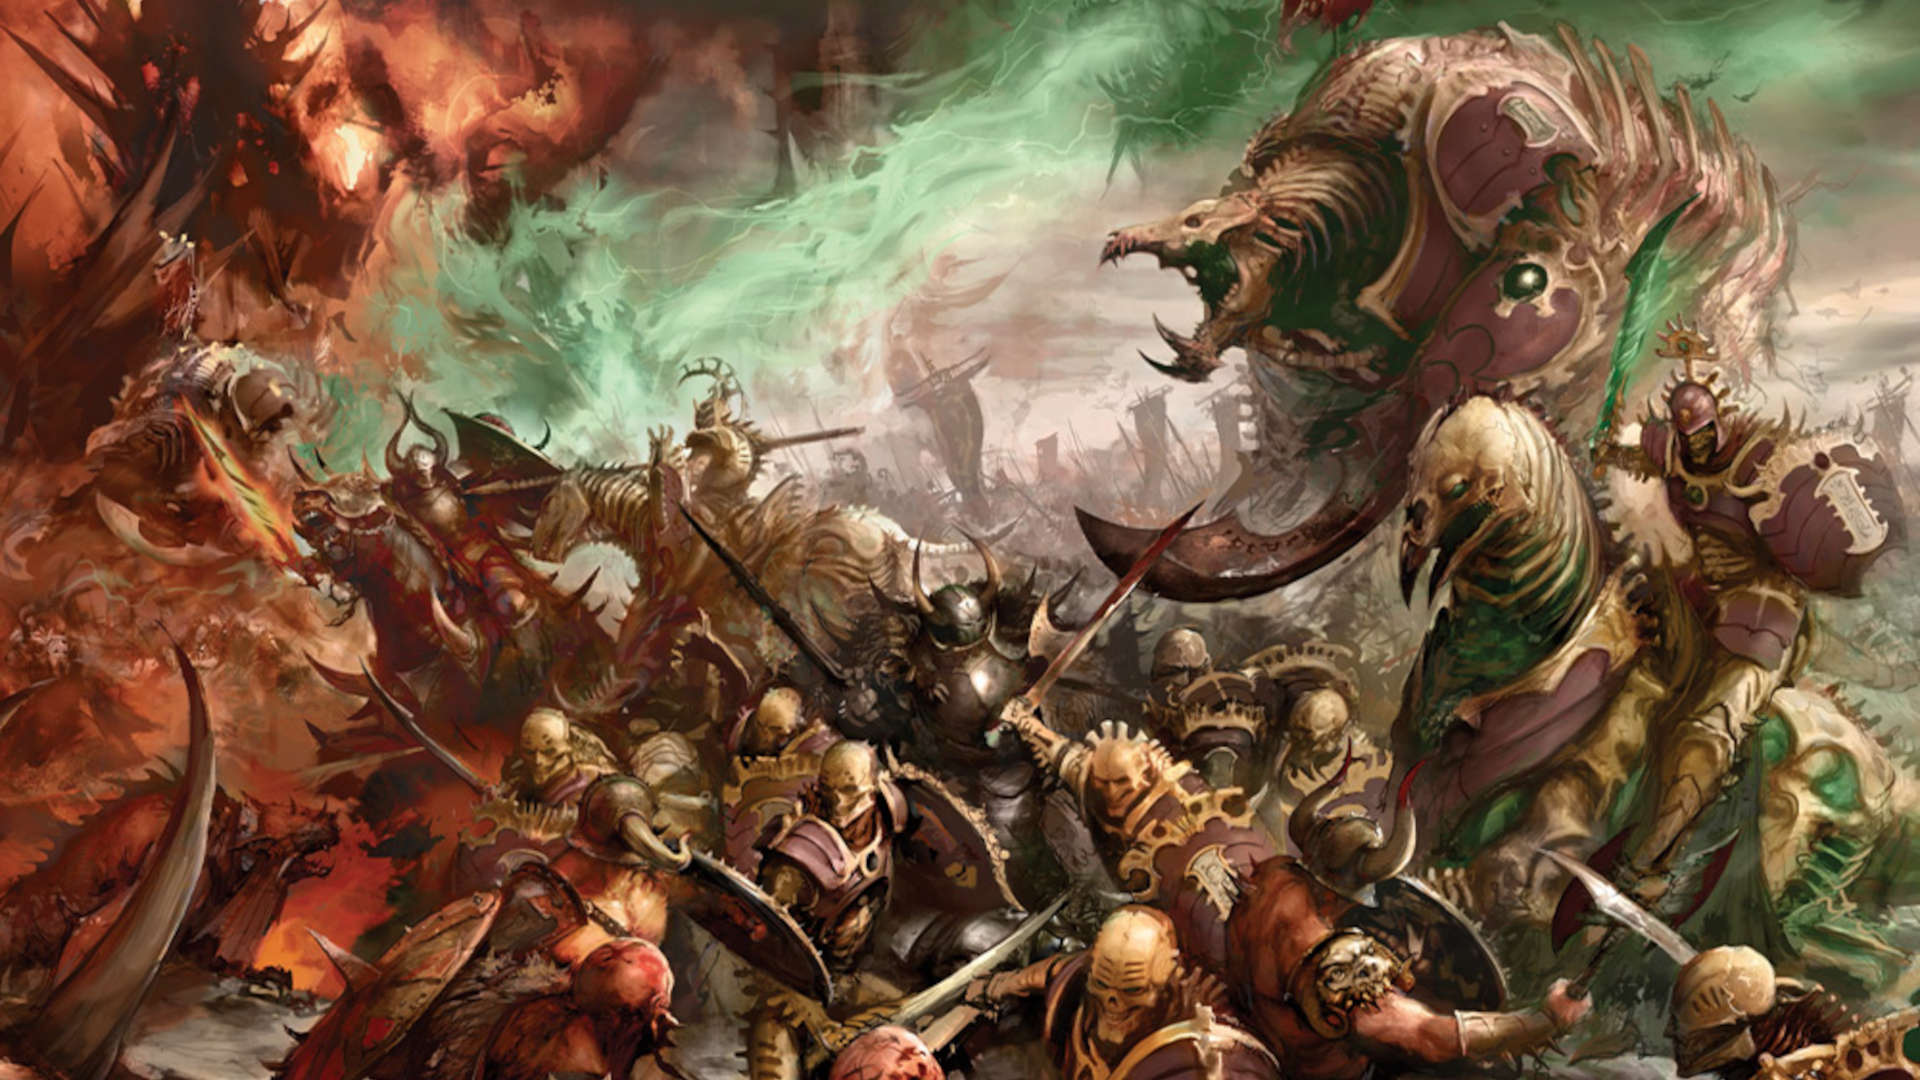 Ossiarch Bonereapers illustration by Games Workshop - an army of undead skeletal constructs clash with the warriors of chaos